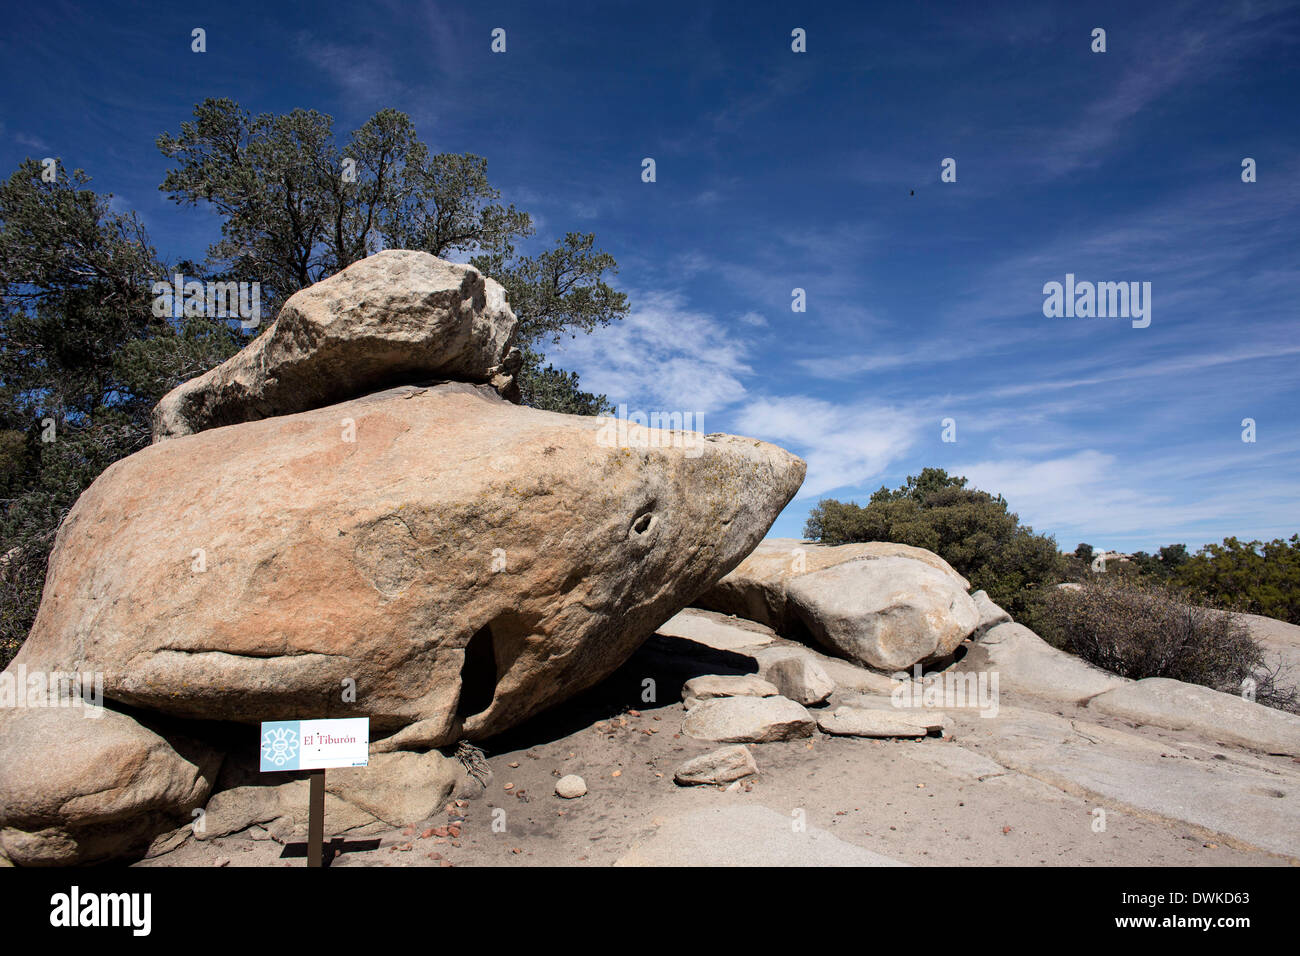 (140311) -- BAJA CALIFORNIA, March 11, 2014 (Xinhua) -- Image taken on March 9, 2014 shows the rock exterior that shelters the 'El Tibur¨®n' cave paintings in the archaelogical site of 'El Vallecito' near La Rumorosa town Baja California, northwest of Mexico. According to the National Institute of Antropology and History (INAH, its acronym in Spanish), El Vallecito was occupied by members of the Yuman linguistic family, which originally lived in the northwest area of the state of Baja California and southern California. At the site there are rock paintings of simple lines traced with mineral d Stock Photo